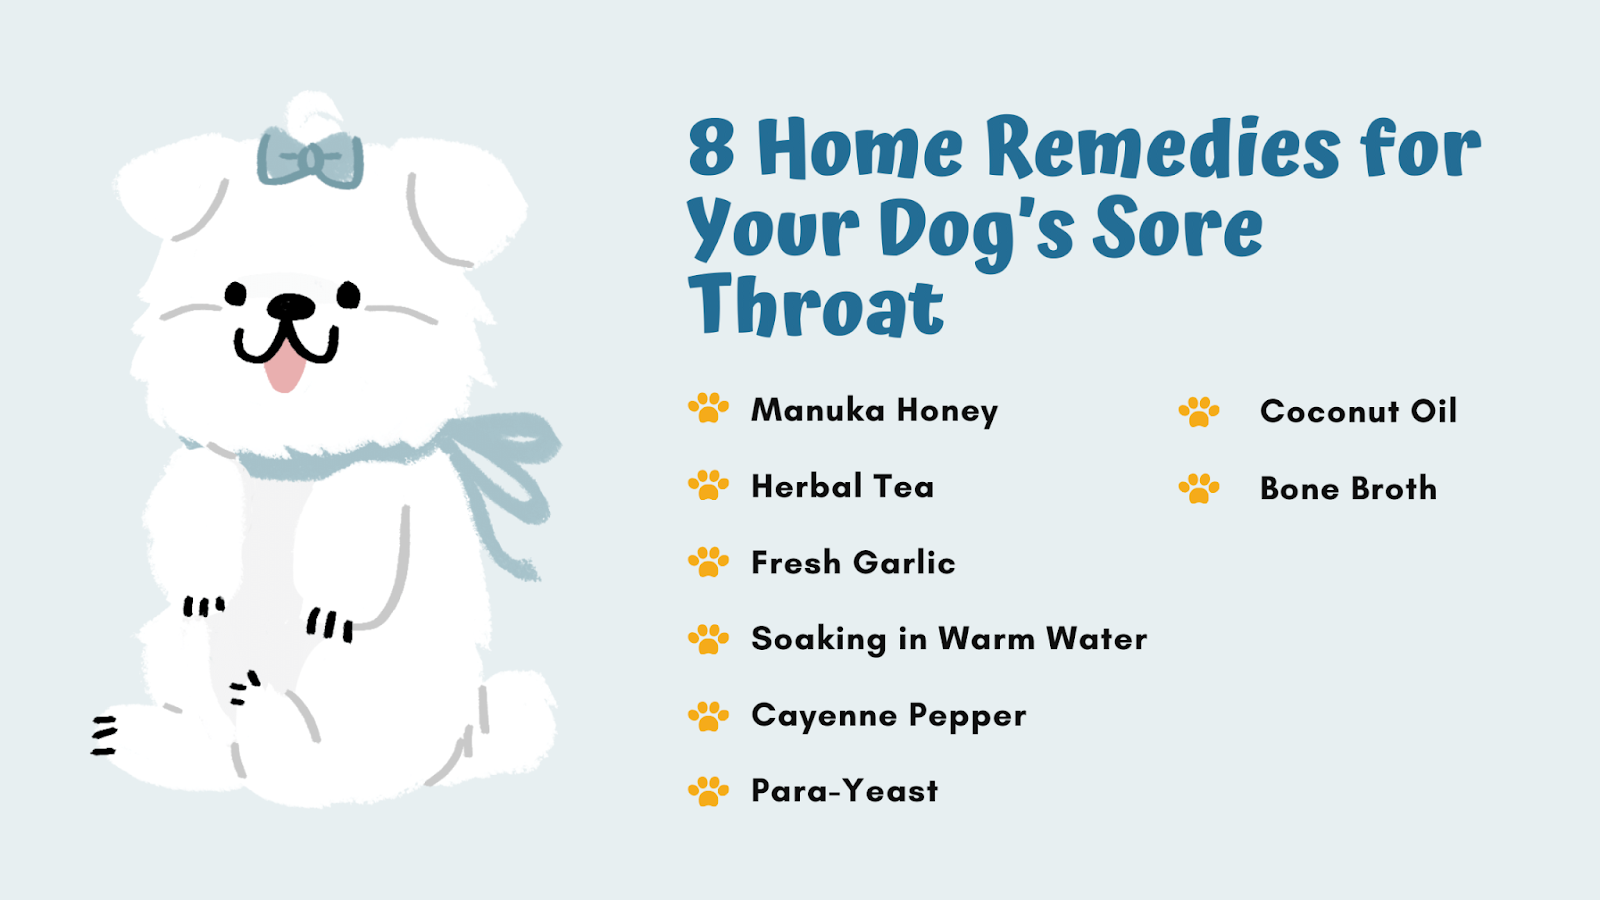 8 home remedies for your dog's sore throat